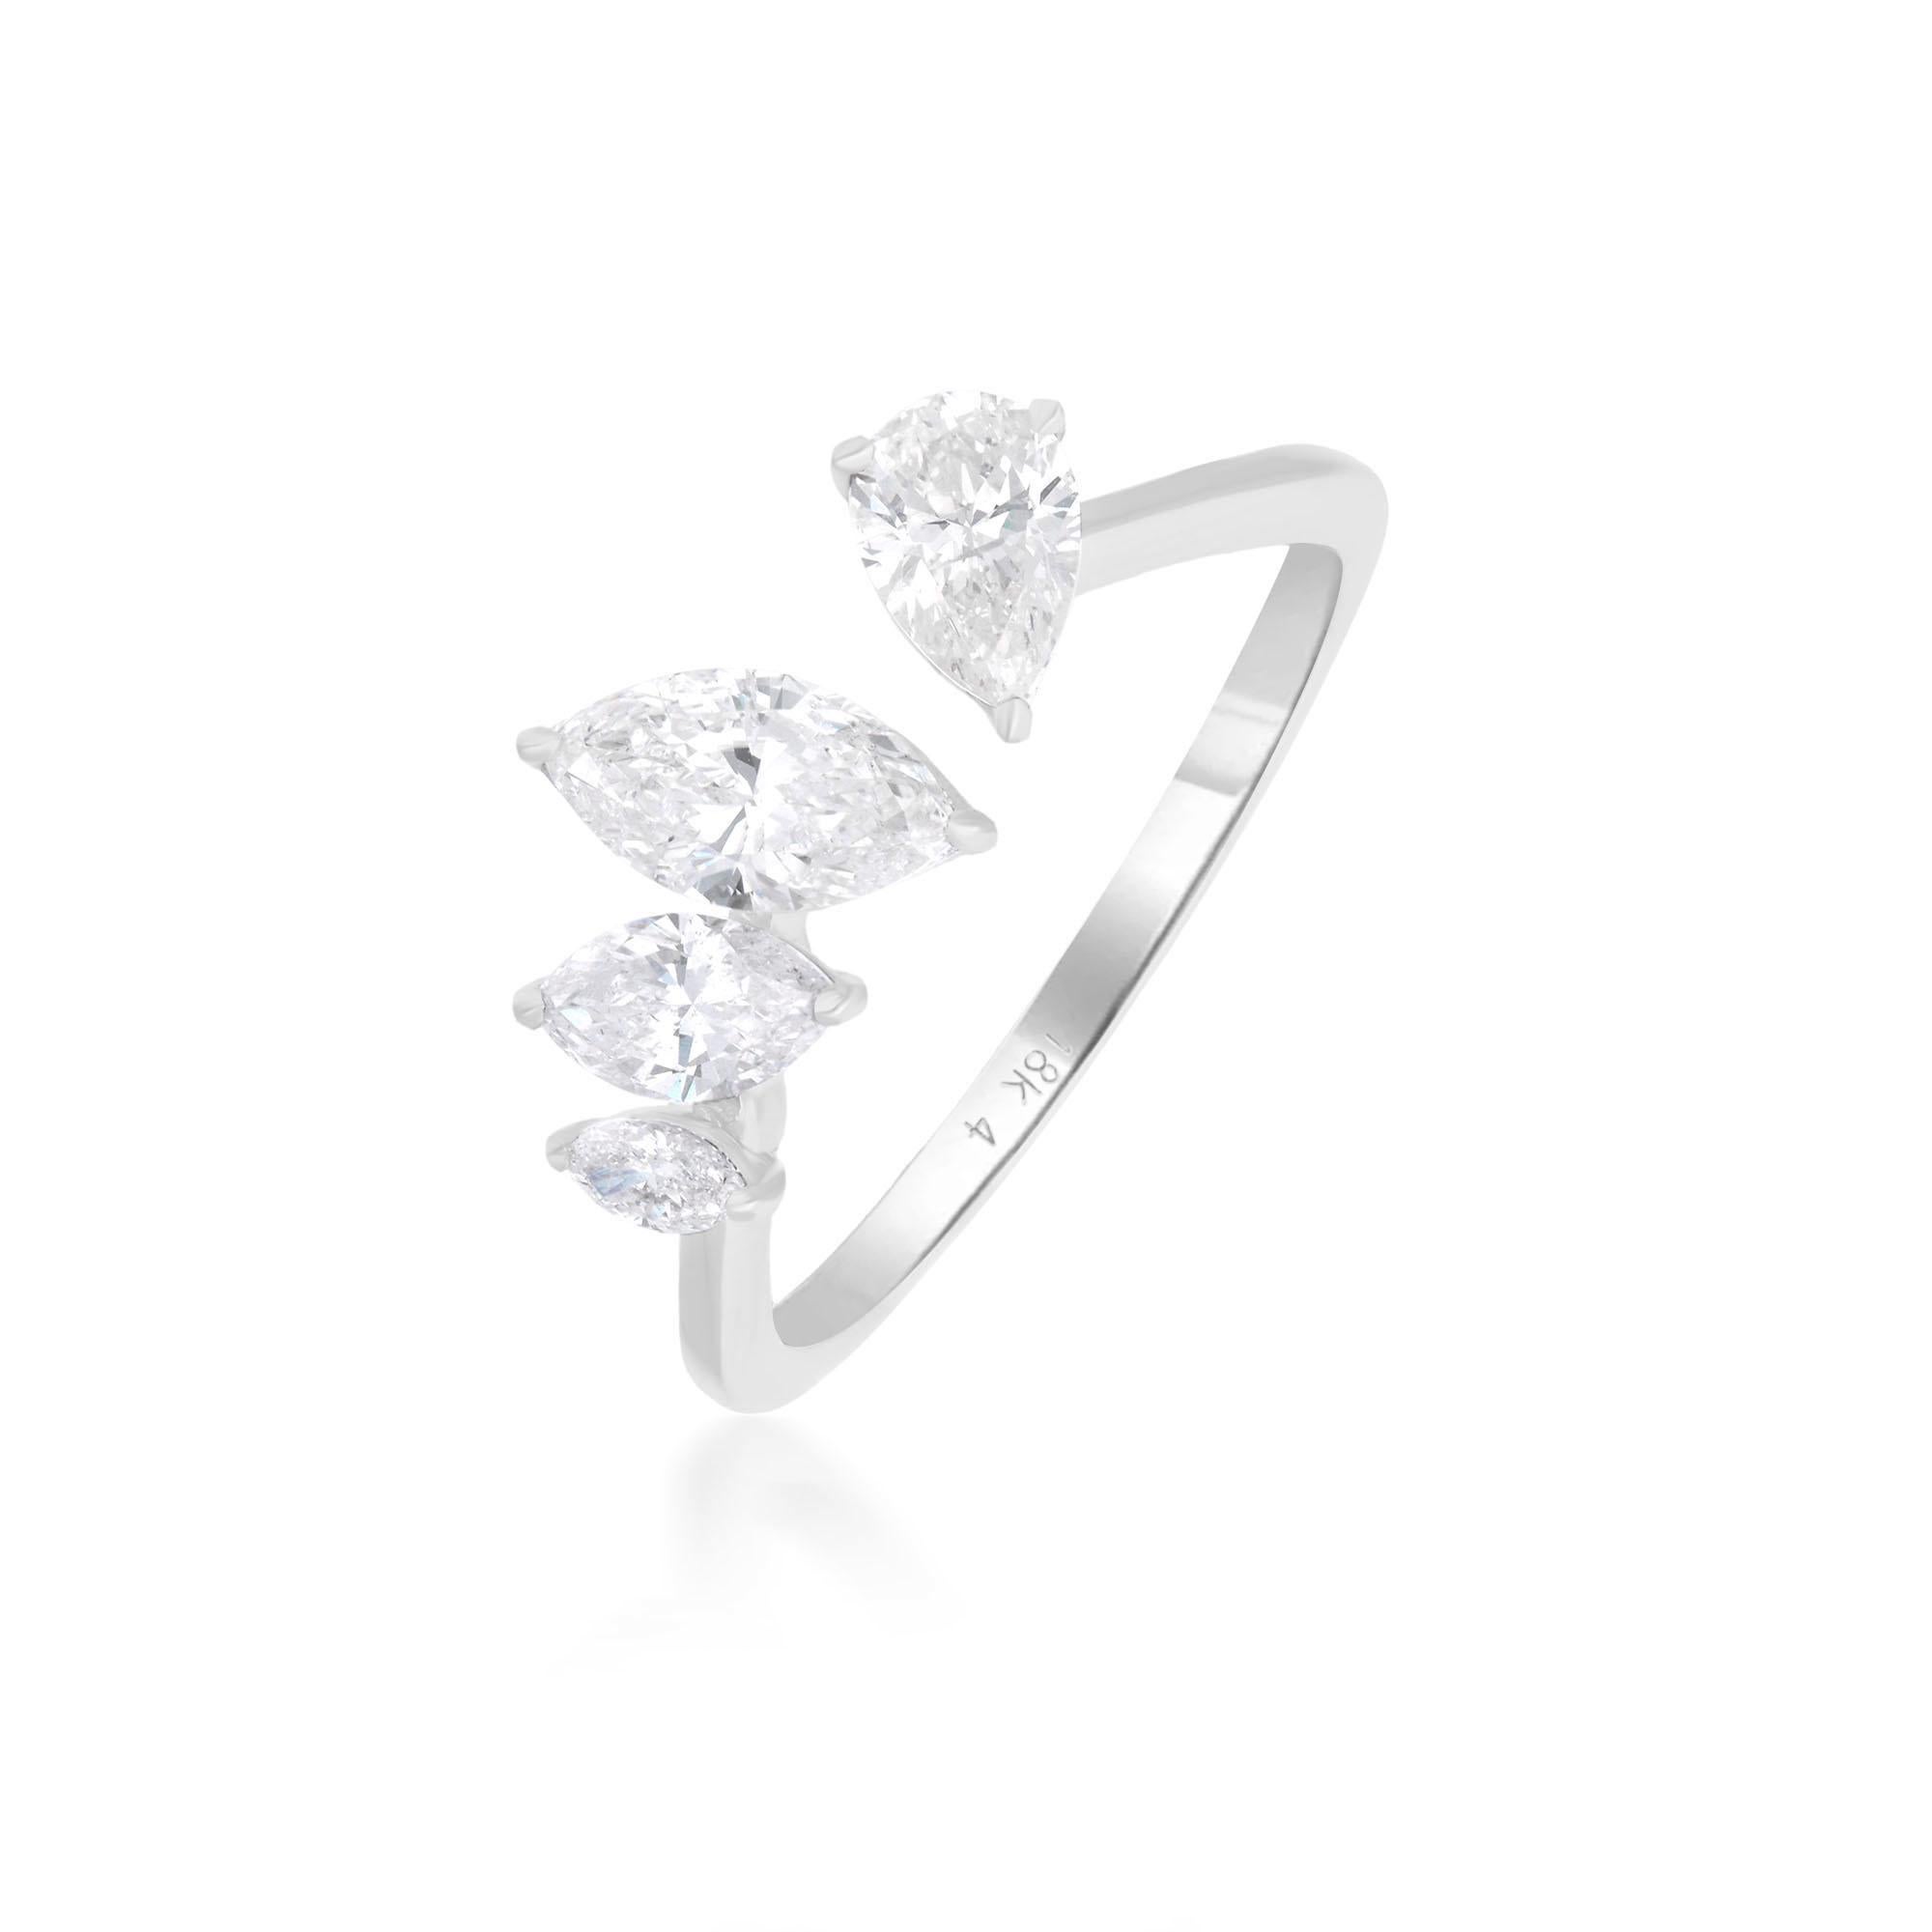 Expertly set in a sleek cuff-style band, the diamonds are arranged in an intricate pattern that wraps around the finger with effortless grace. The cuff design adds a modern twist to the classic diamond ring, creating a bold and contemporary look